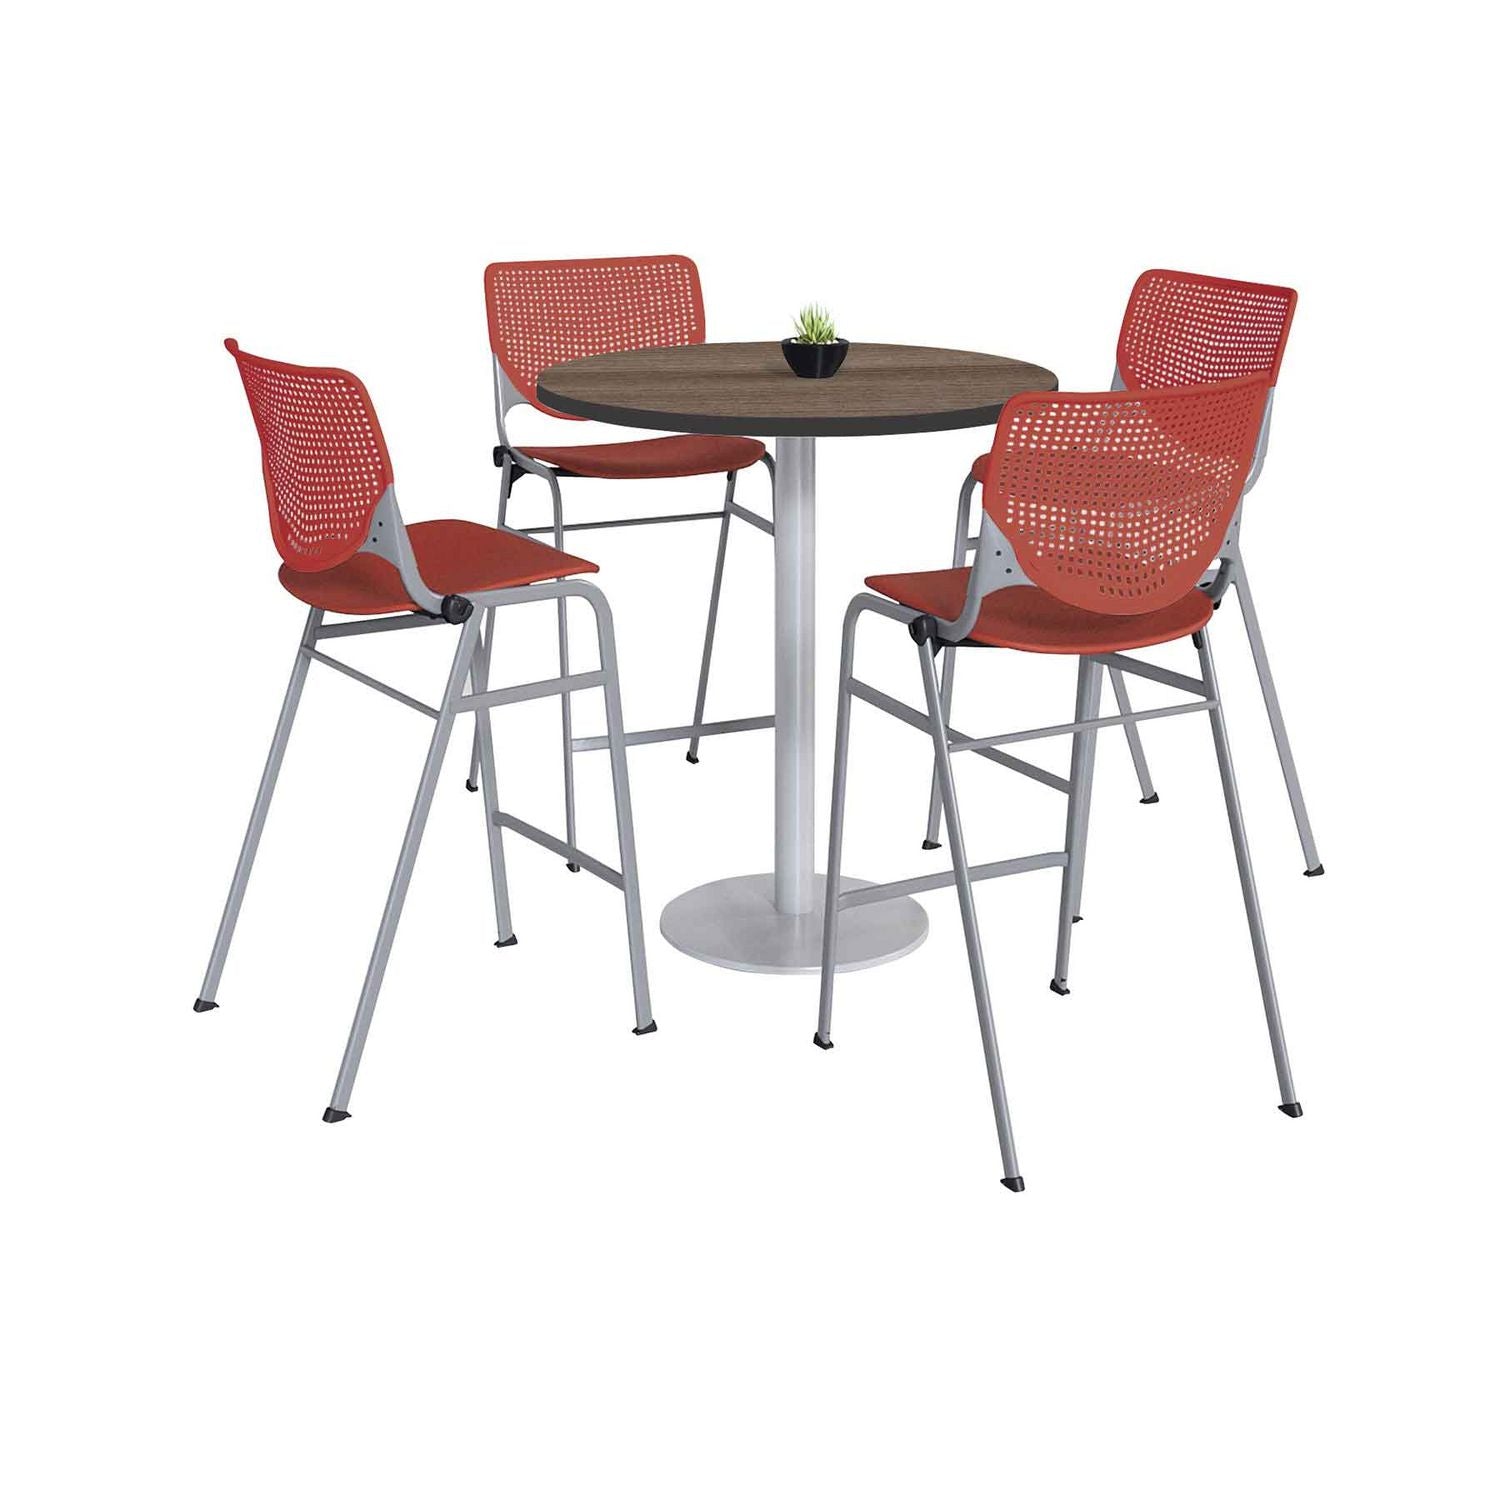 pedestal-bistro-table-with-four-coral-kool-series-barstools-round-36-dia-x-41h-studio-teak-ships-in-4-6-business-days_kfi811774037303 - 1